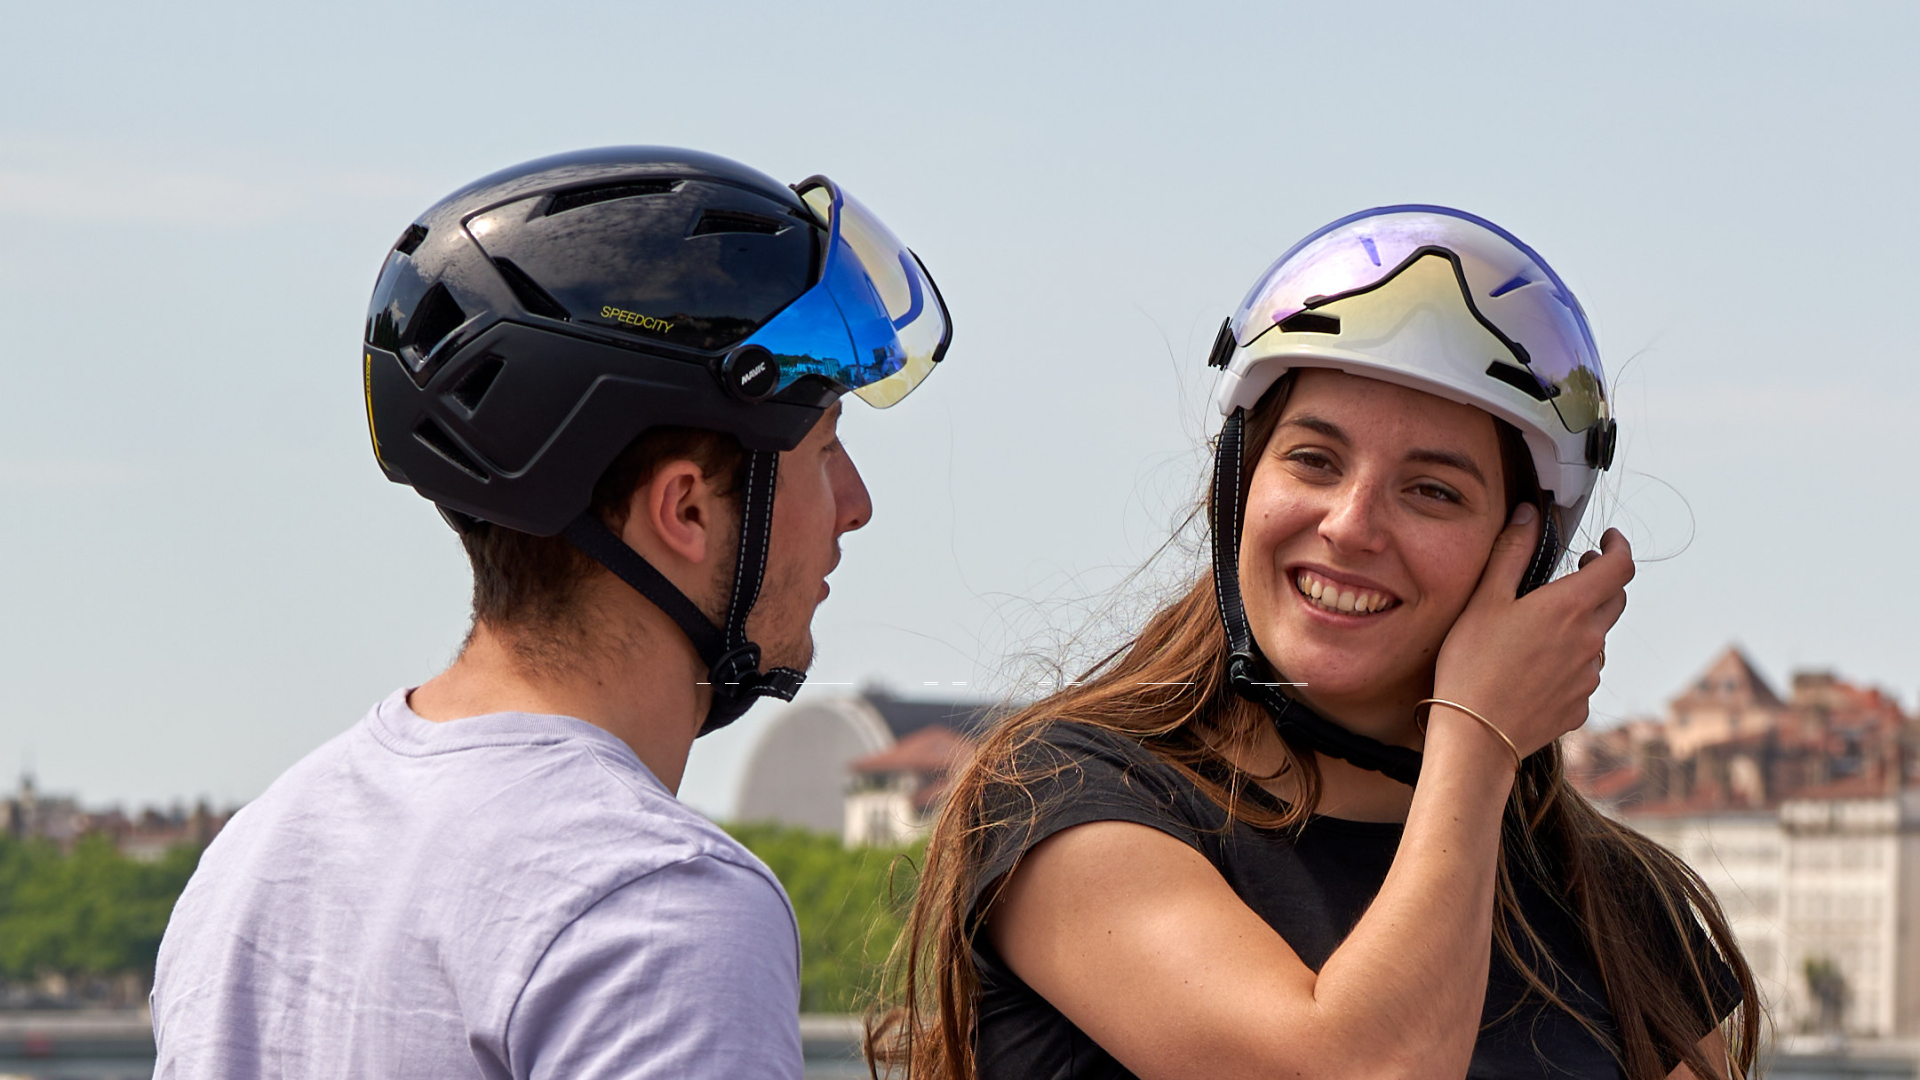 Urban Cycling Helmets-Safety and style at the heart of your daily commute